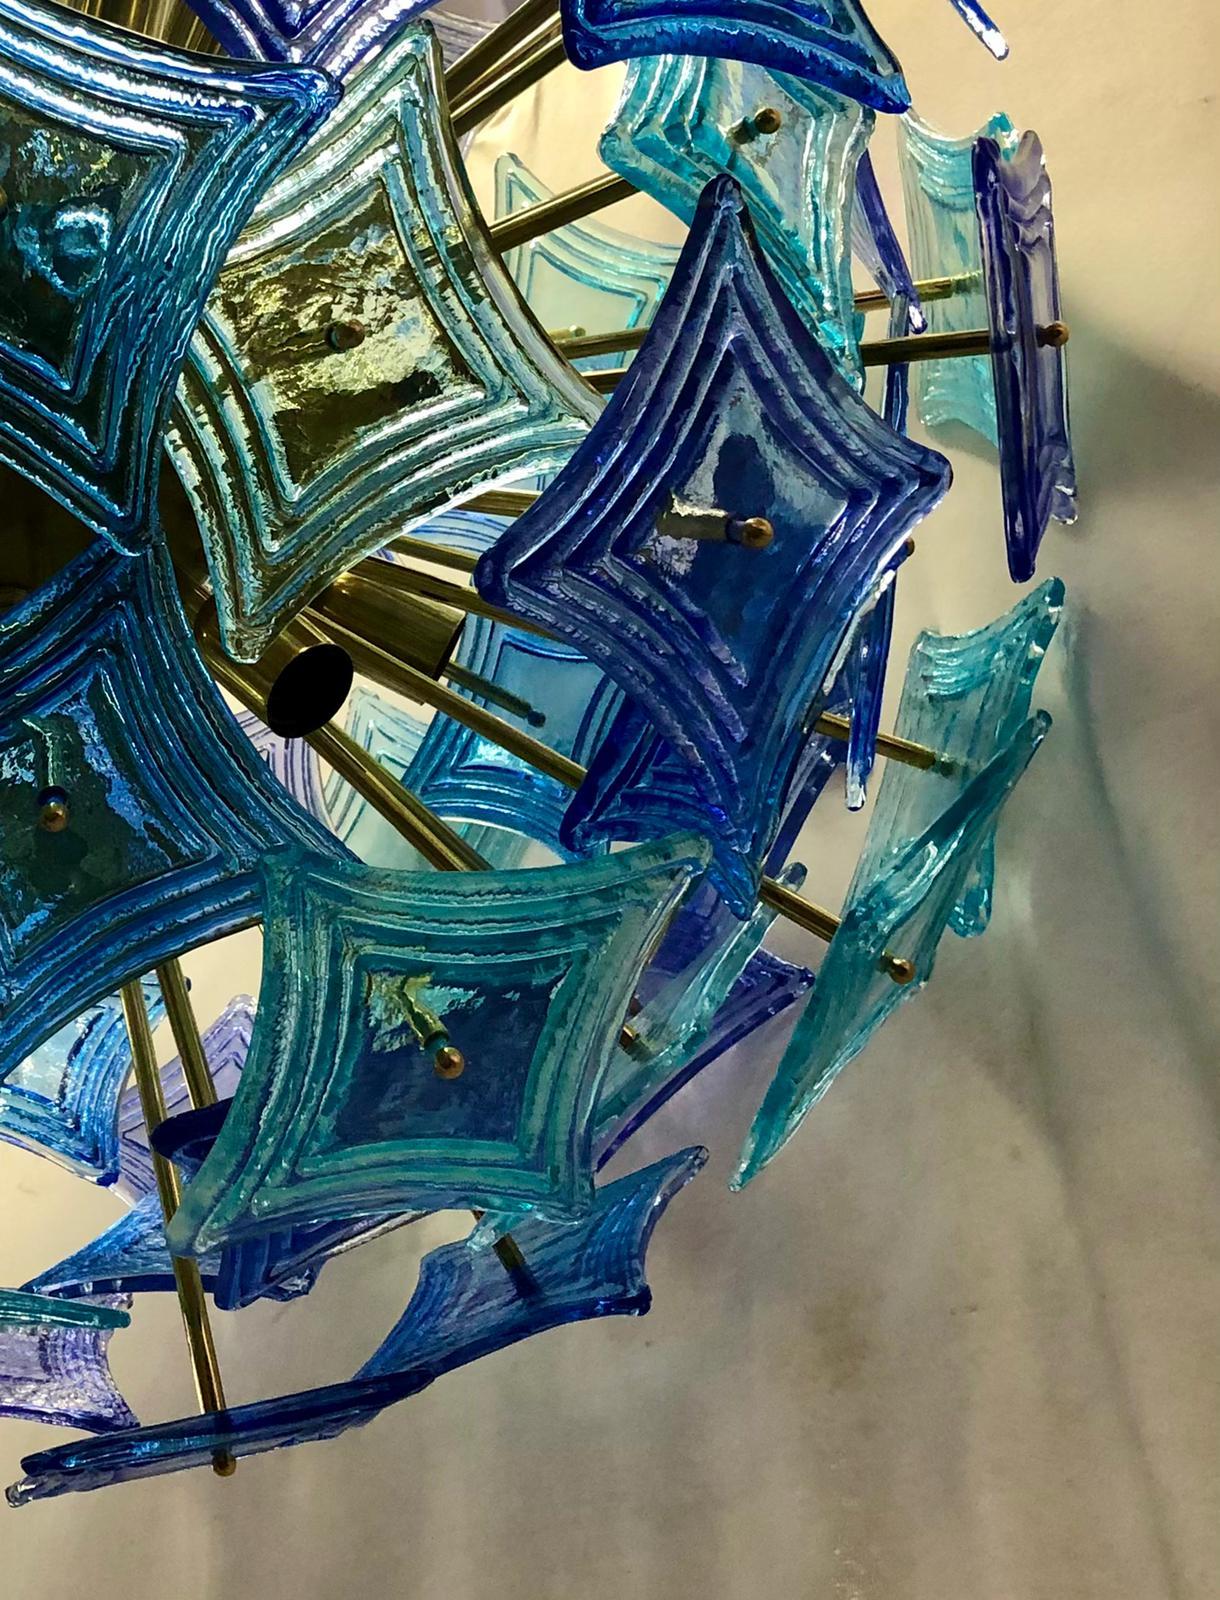 Large and particular glass handkerchiefs, as if they were rhombus, make up this beautiful Murano chandelier, plus with two bright and original colors light green and blue.

Made of a large central sphere in which brass rods are screwed, glass